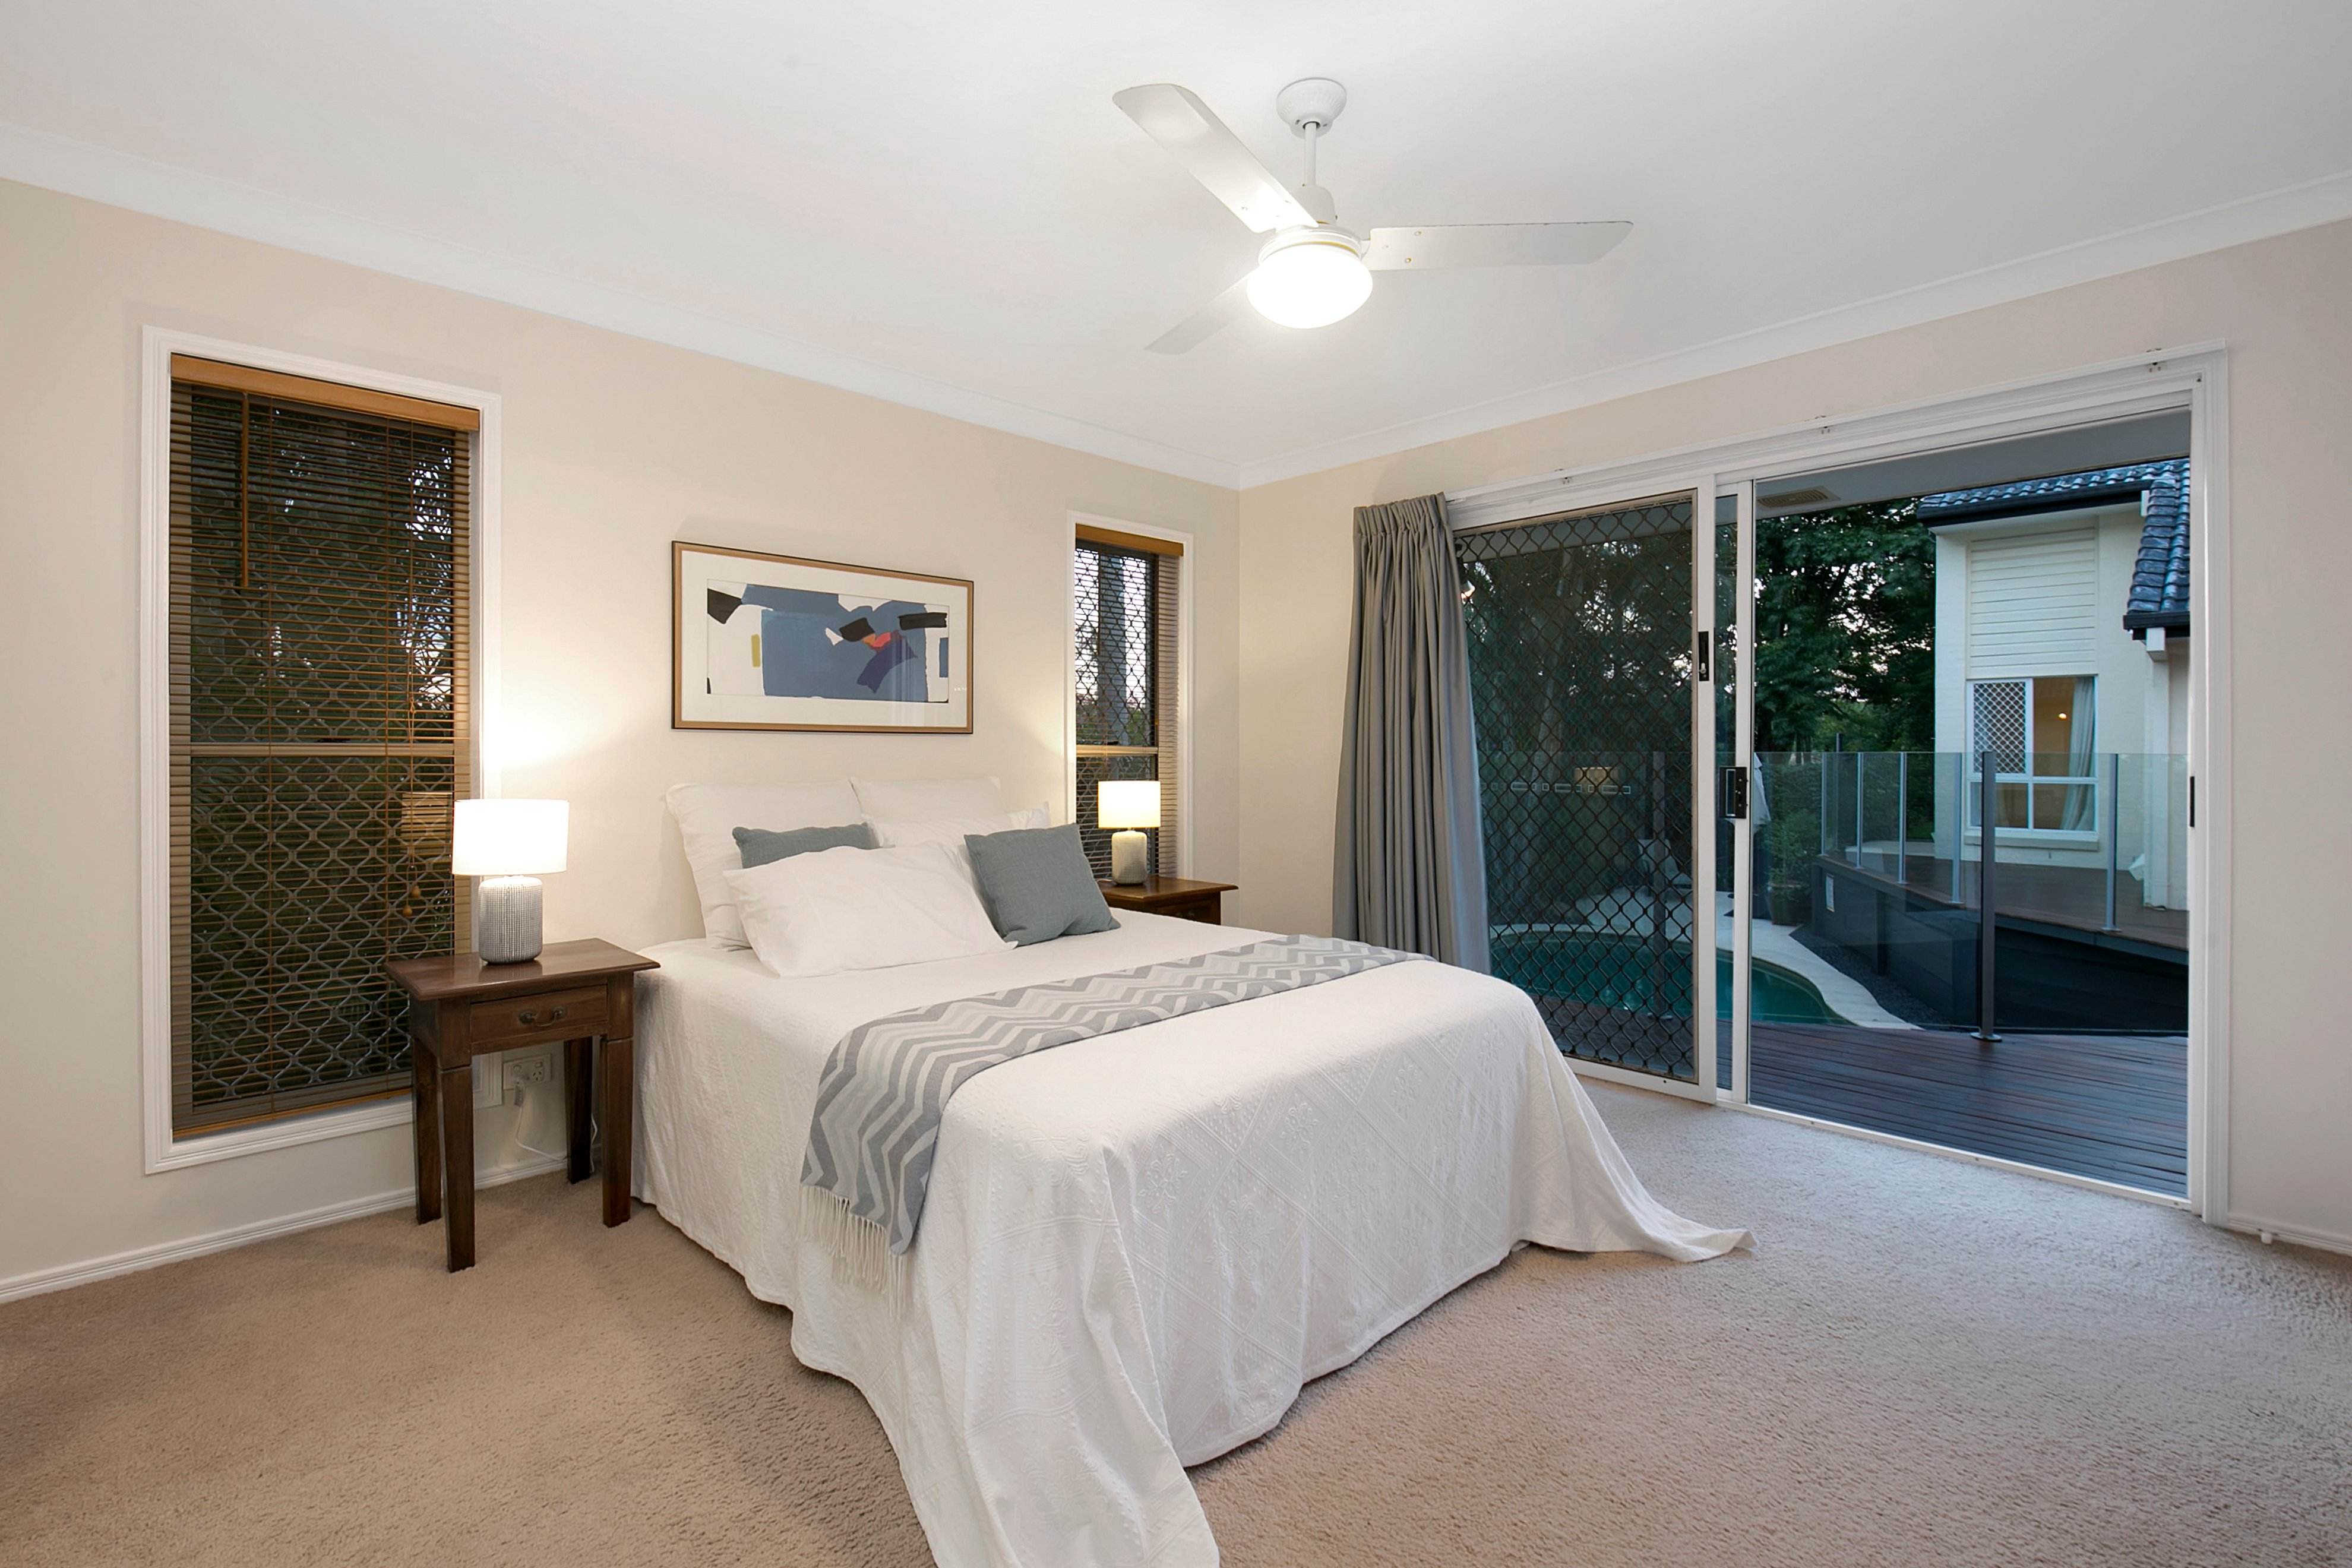 12 Ringway Place, Chapel Hill bedroom